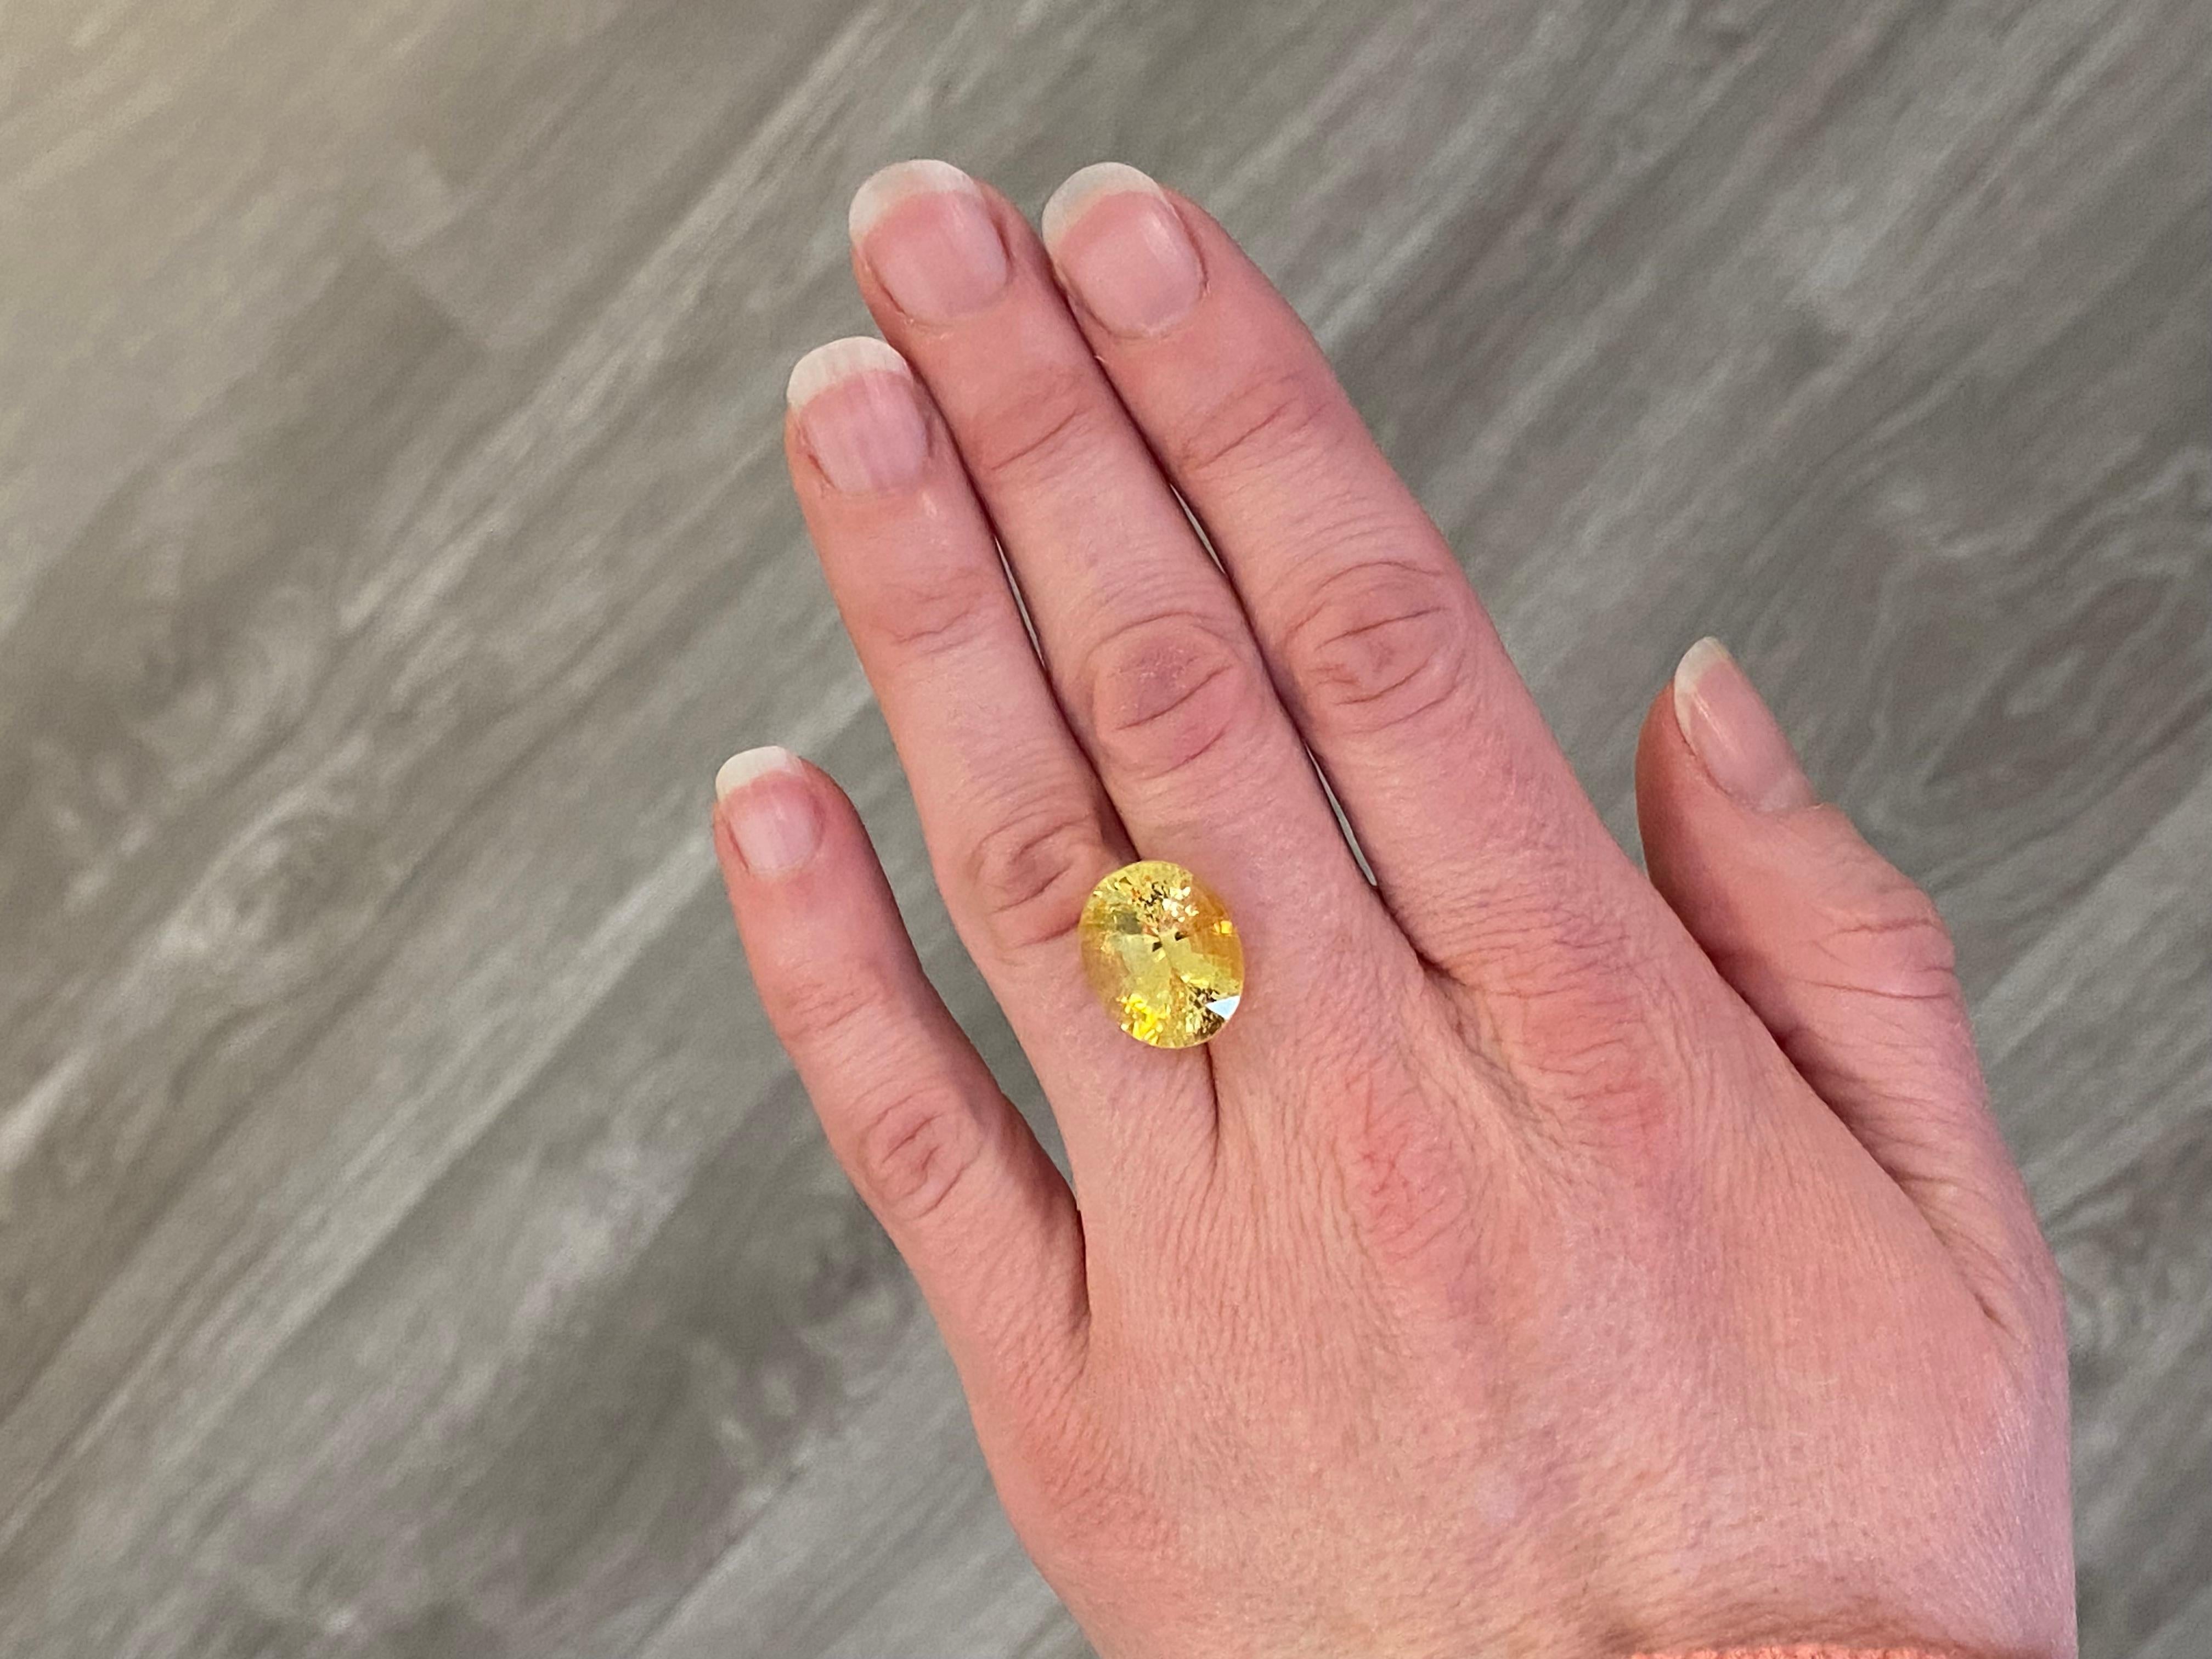 A yellow sapphire of 17.74ct, with a beautiful light to medium colour. This stone can be part of a beautiful ring or pendant, all hand-made by our expert artisans here in Geneva.